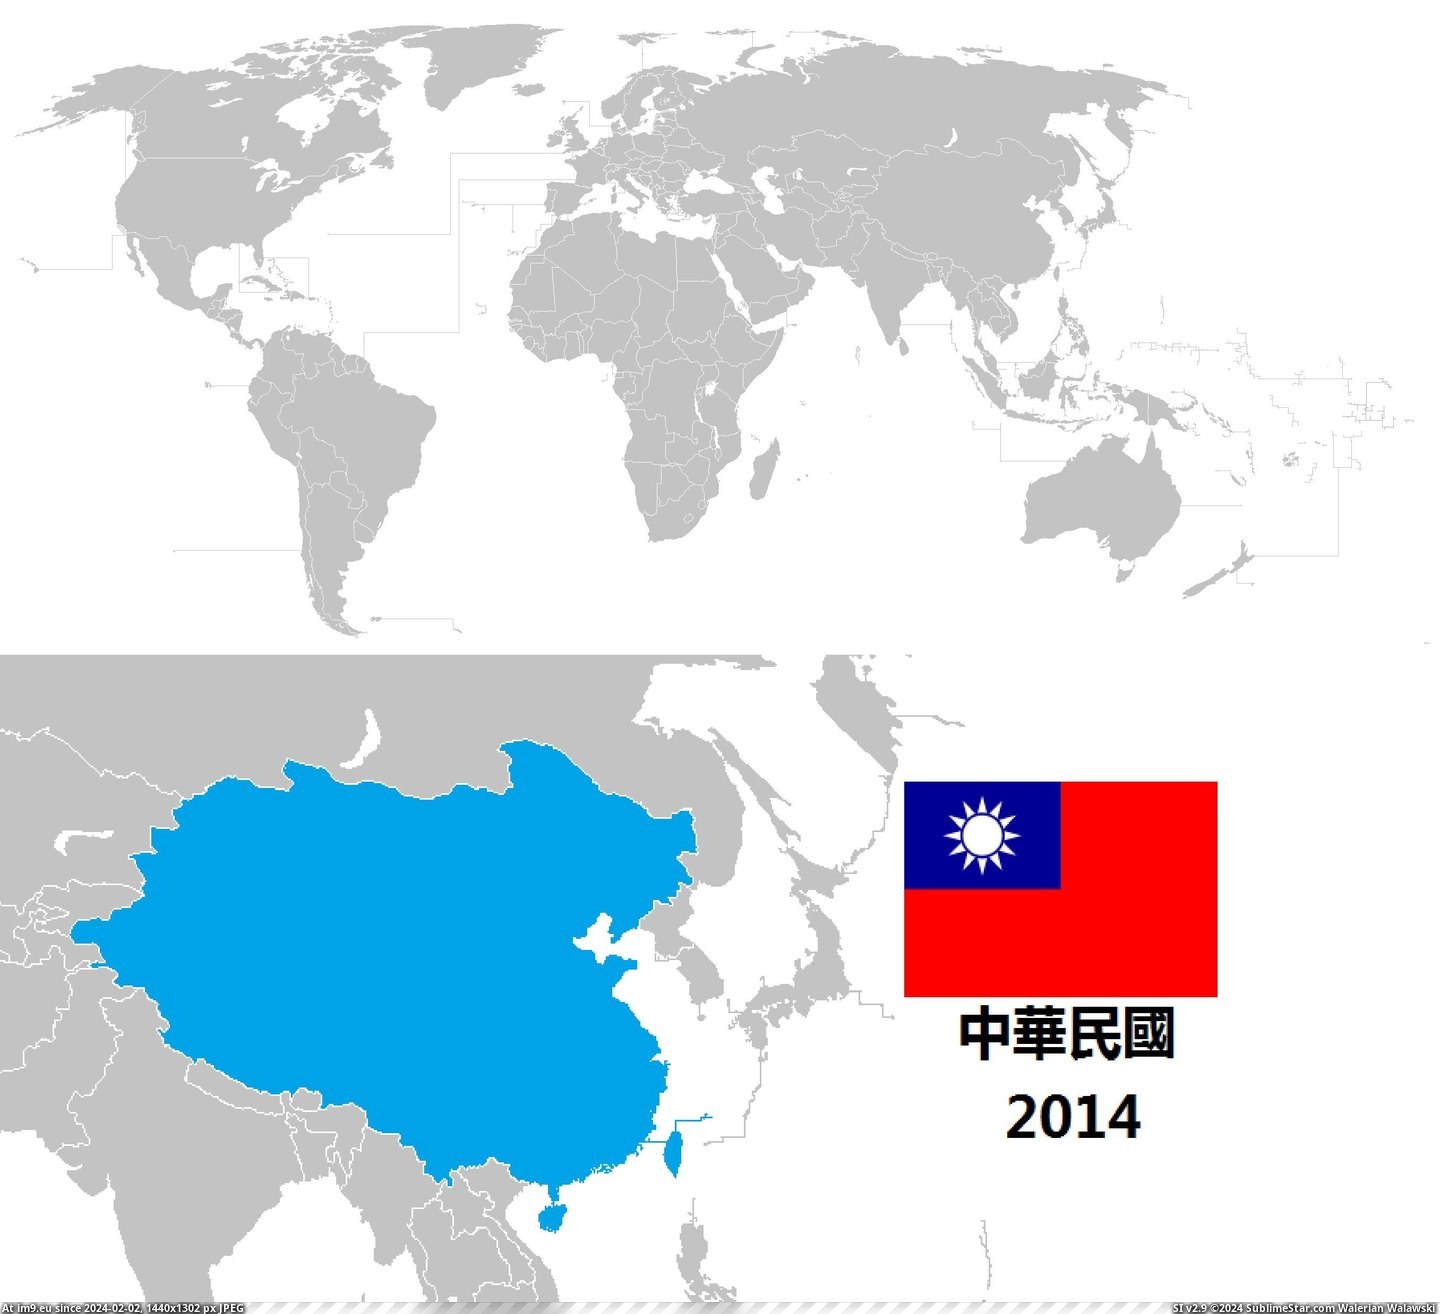 #World #May #Due #Territorial #Boredom #Accura #Based #Claims #Taiwan [Mapporn] The World according to Taiwan, i made due to boredom, based on all of their territorial claims, may not be 100% accura Pic. (Изображение из альбом My r/MAPS favs))